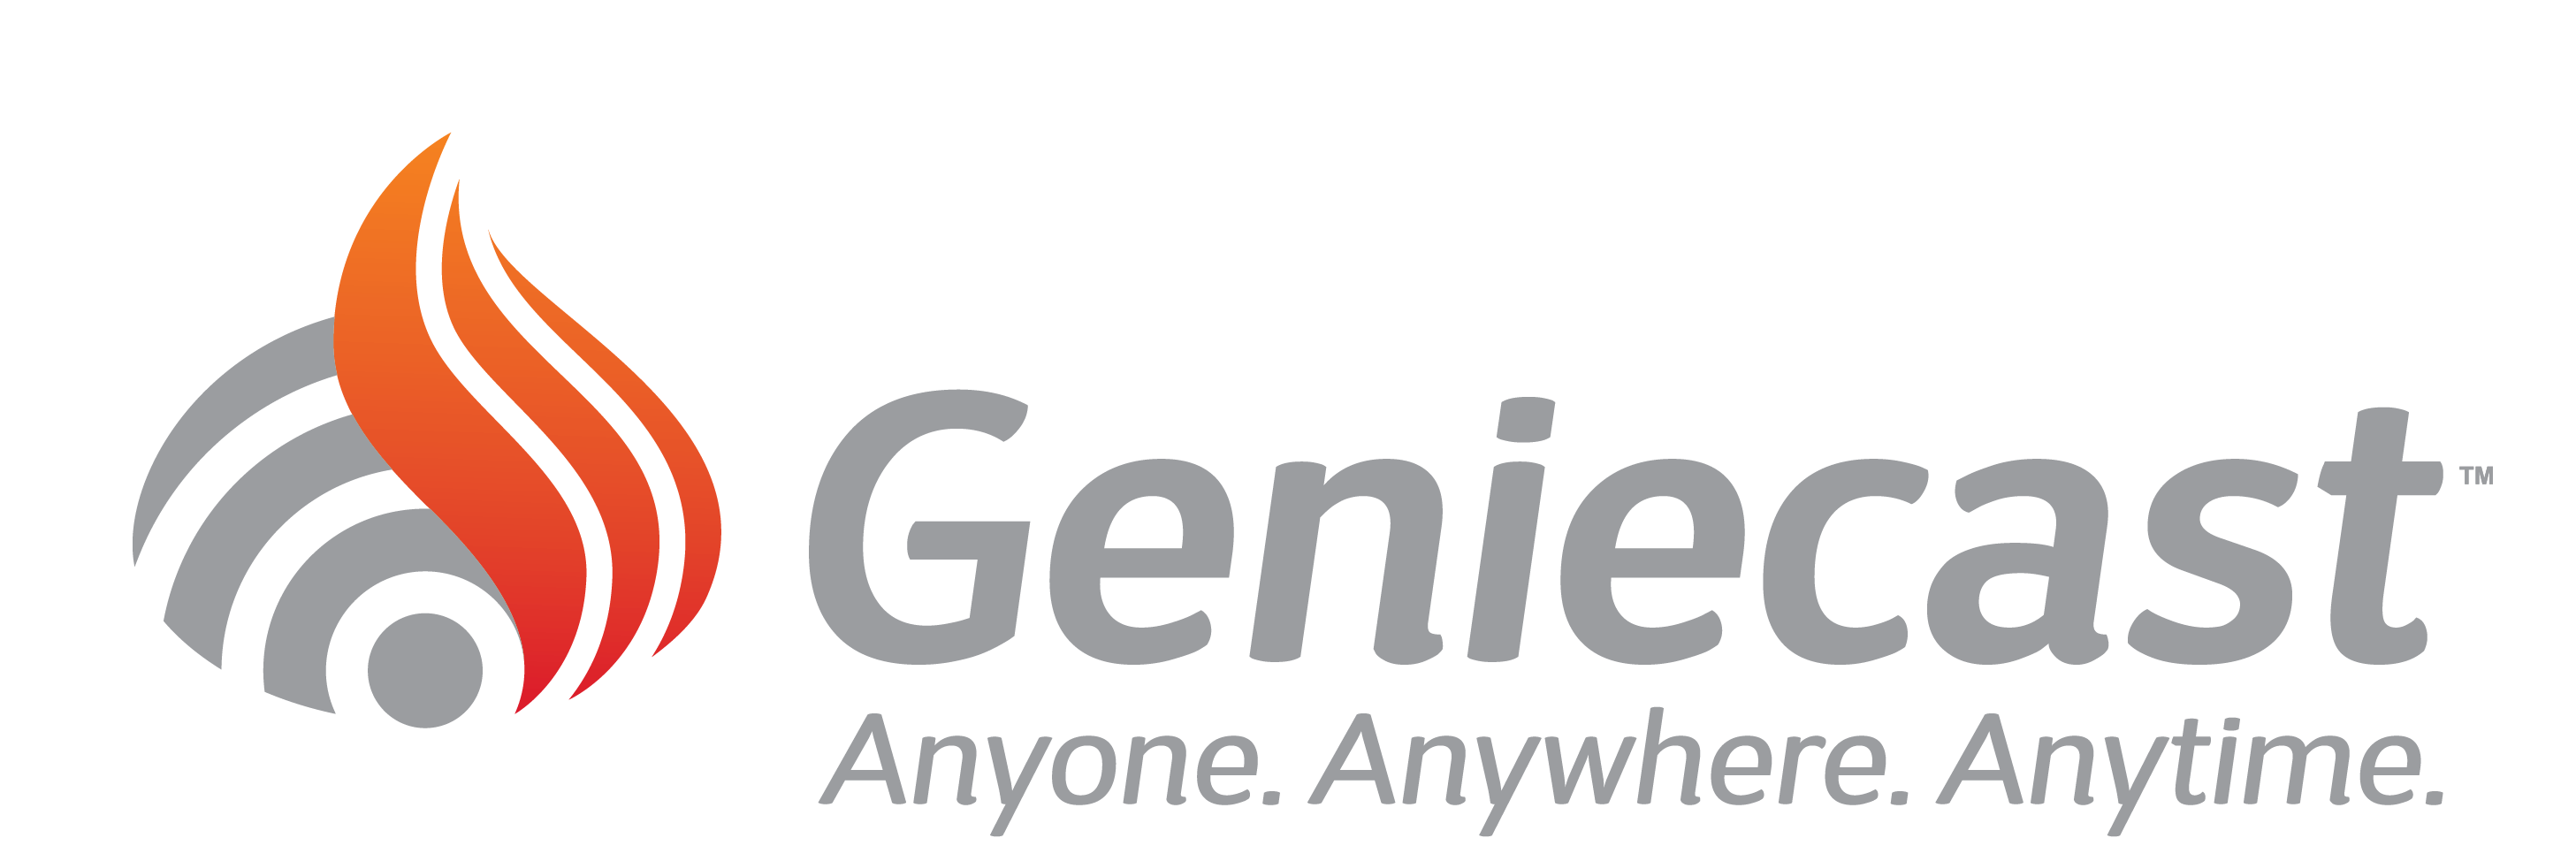 Geniecast Marketplace of Speakers and Experts